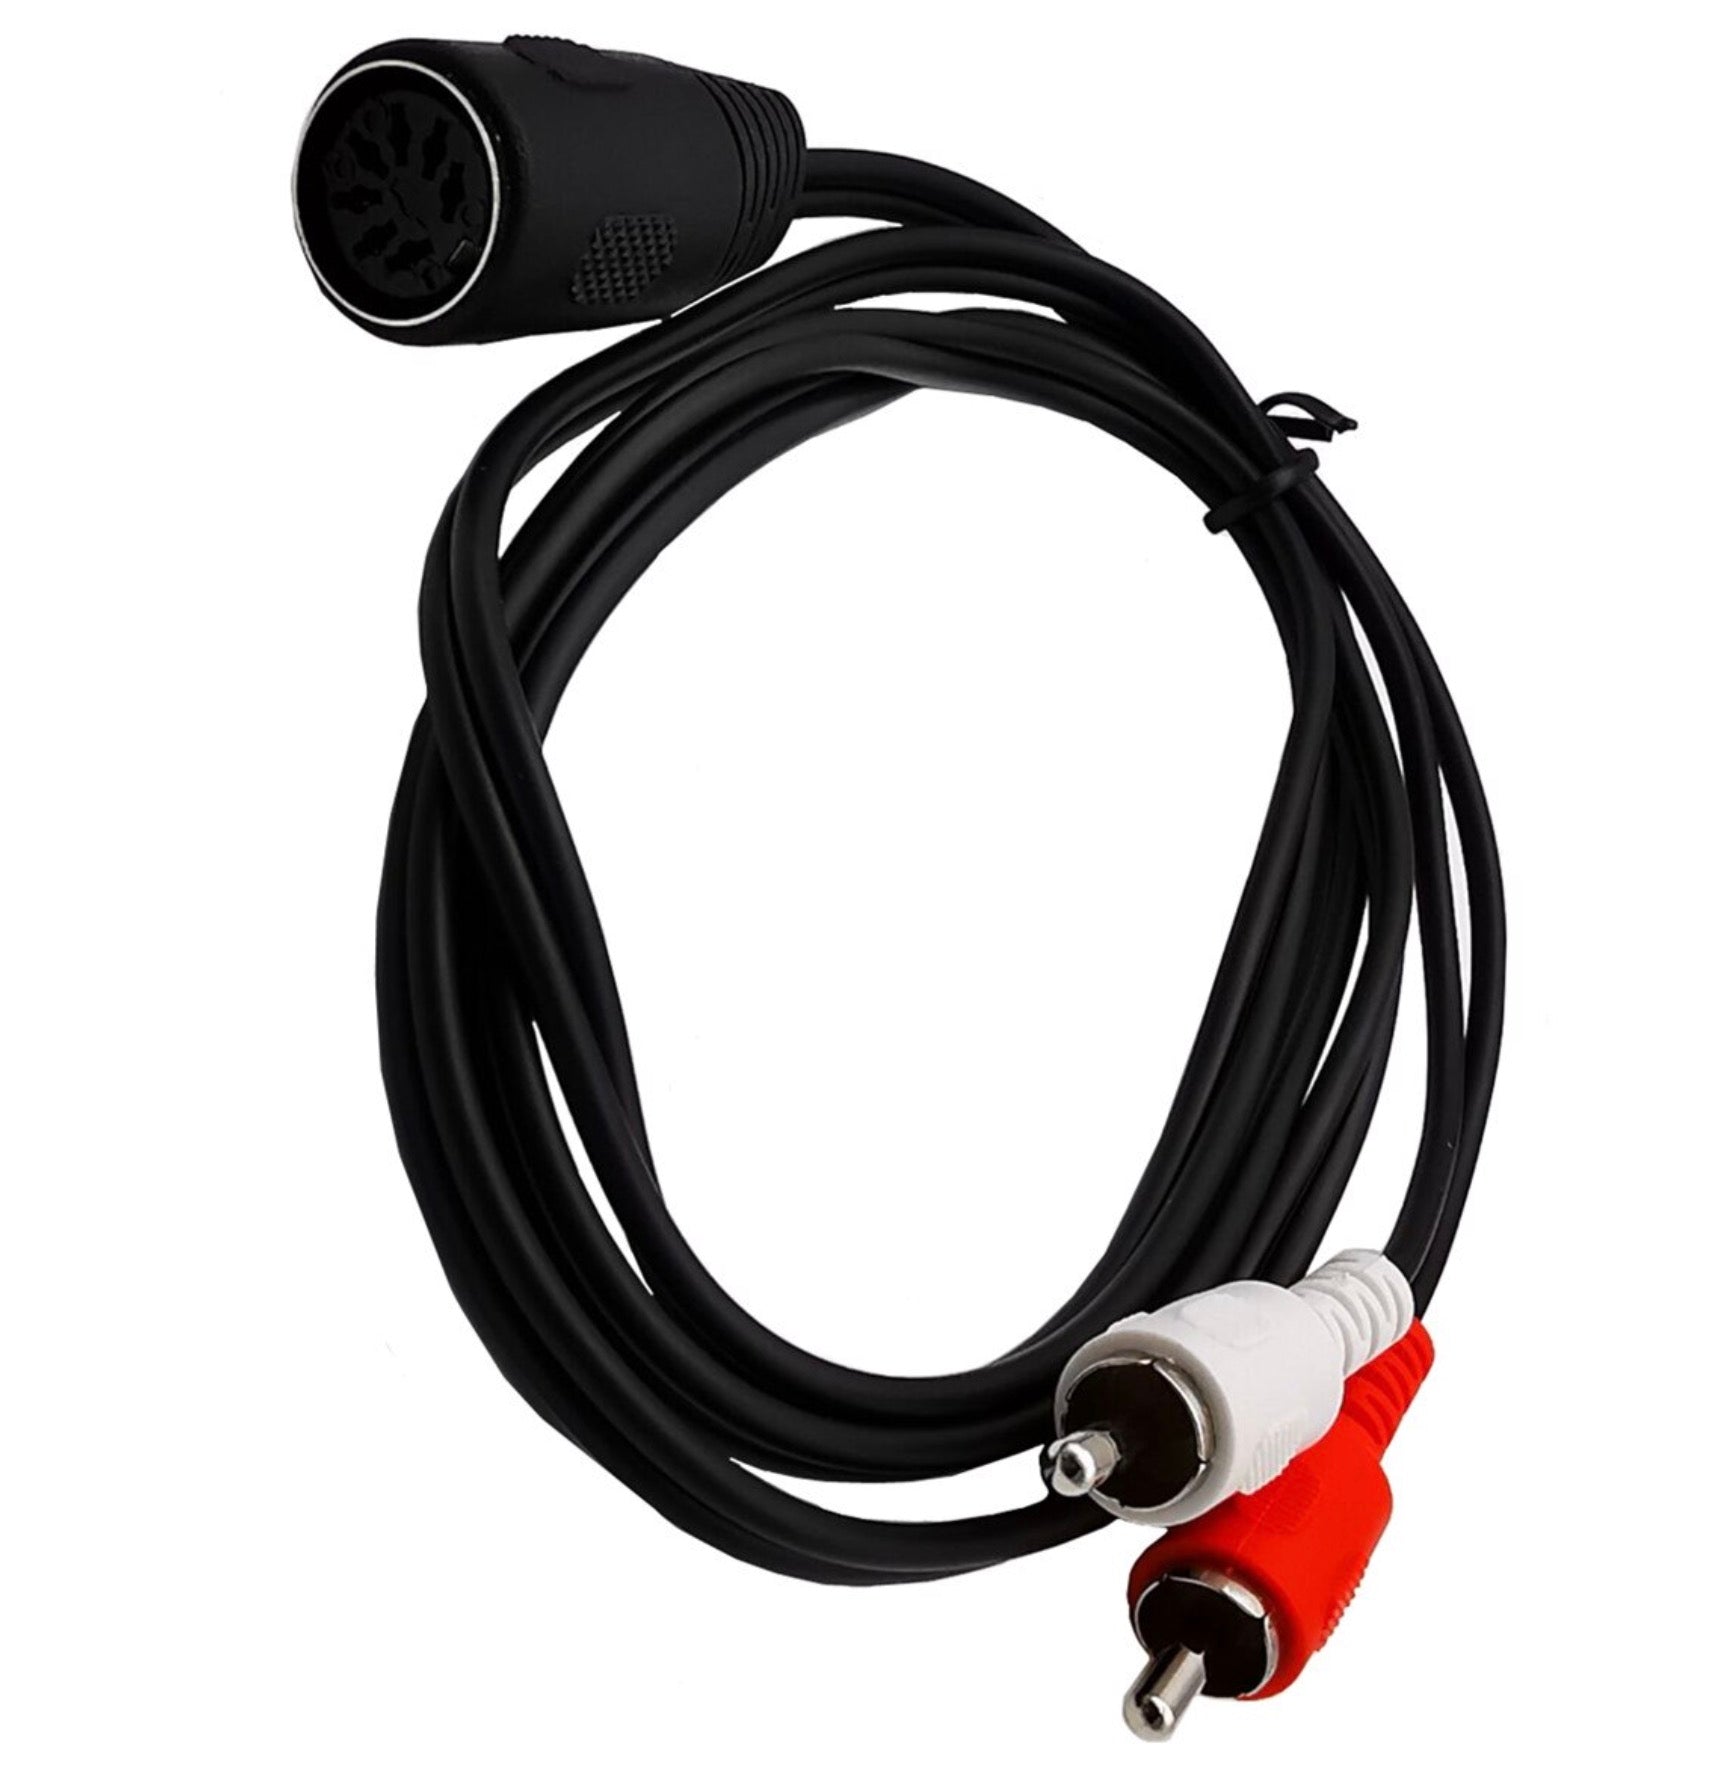 7-Pin Din Female to Dual RCA Male Audio Cable for Bang & Olufsen, Naim, Quad, Stereo Systems